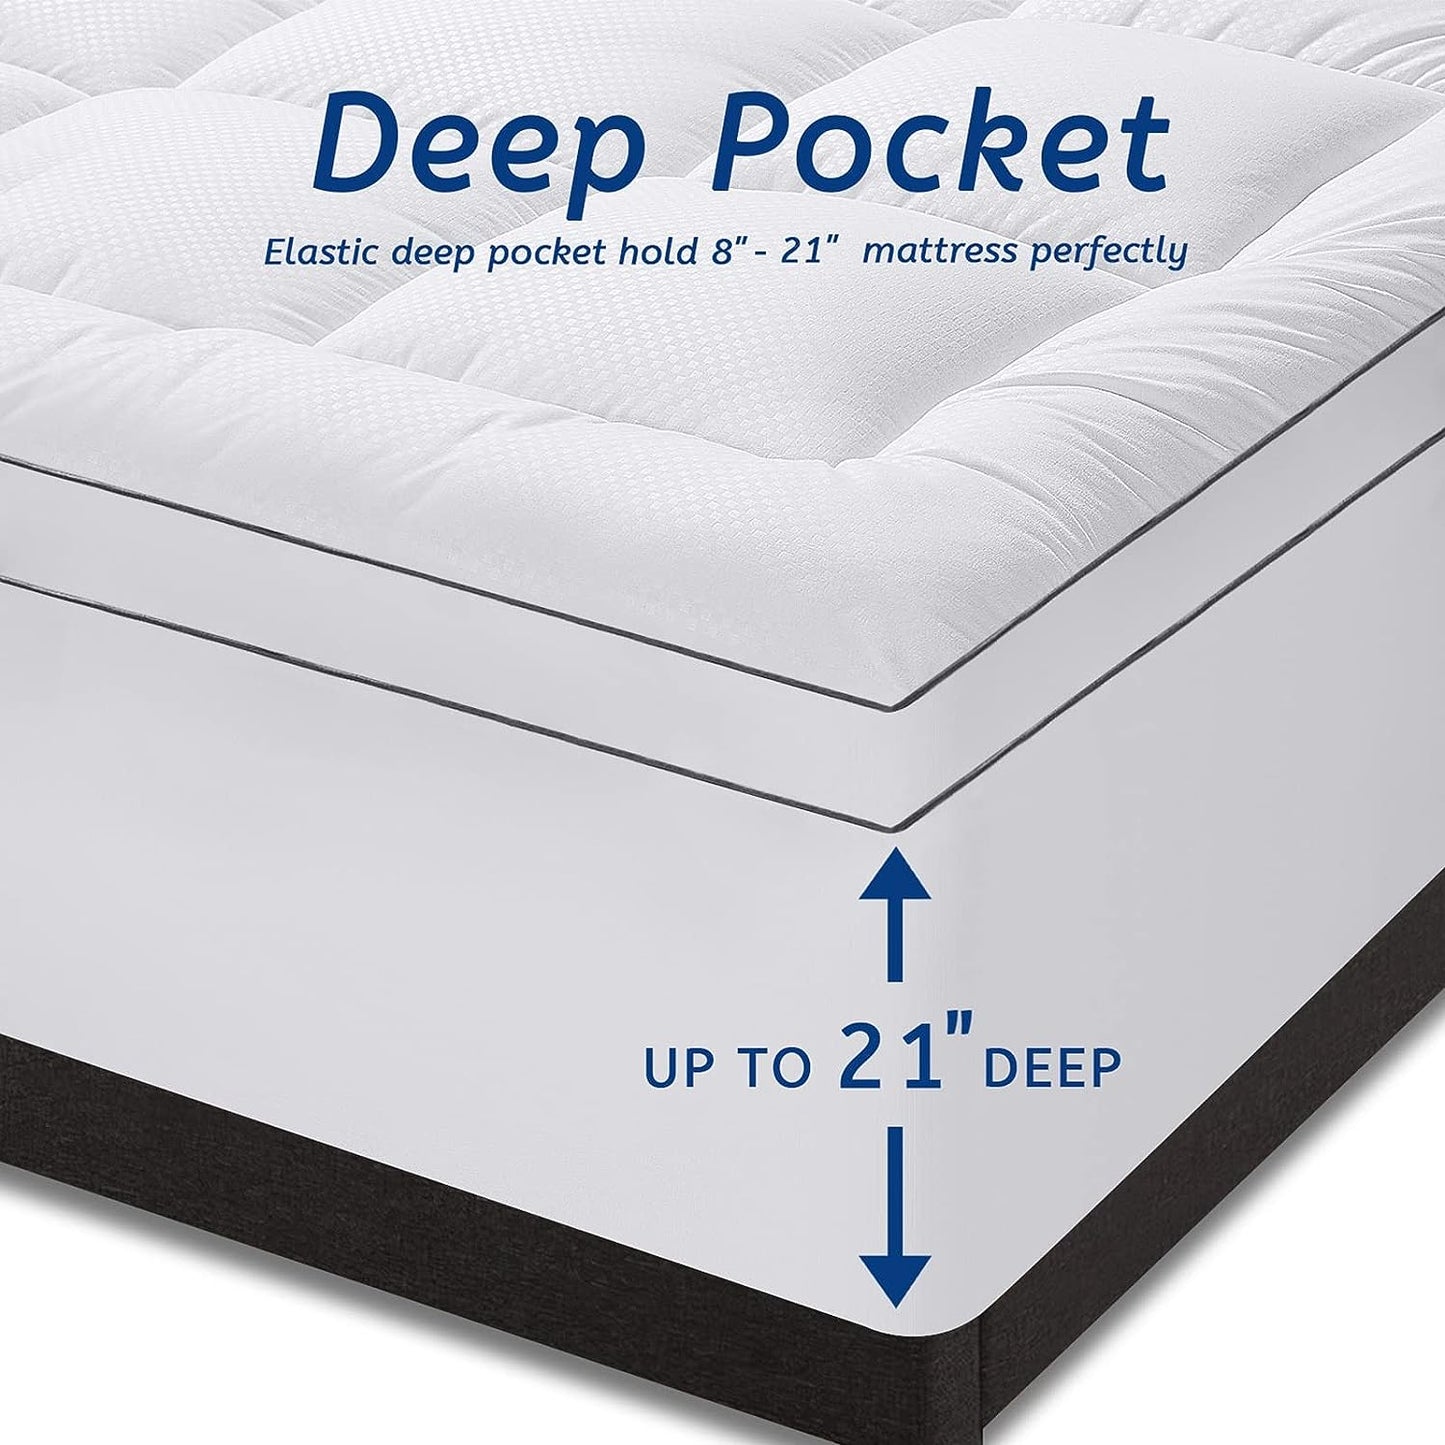 Full Size Mattress Topper for Back Pain, Cooling Extra Thick Mattress Pad Cover with 8-21 inch Deep Pocket, Plush Pillow Top Mattress Topper Overfilled with Down Alternative, Full Size, White (Full, White)